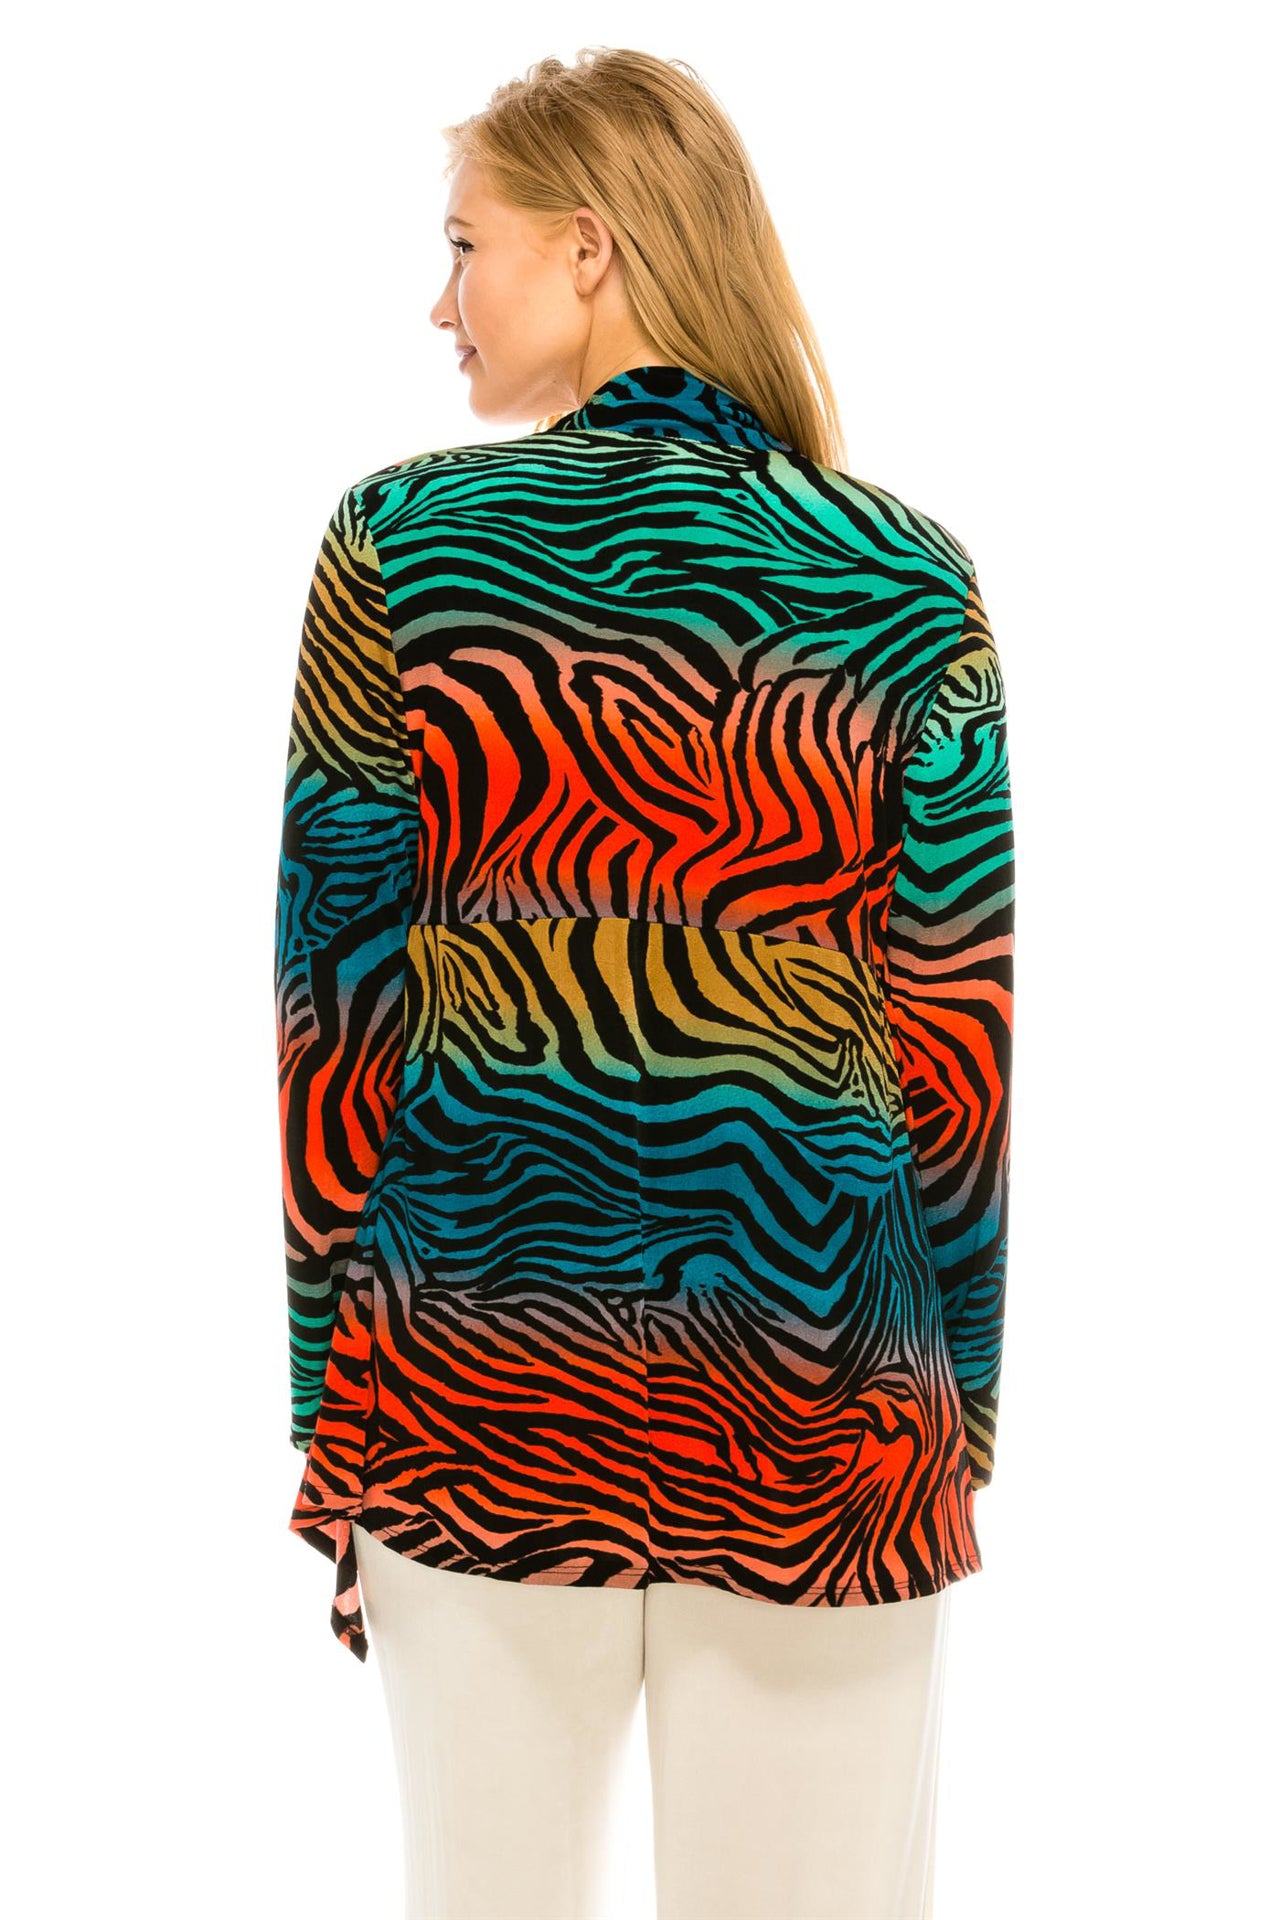 90% polyester / 10% spandex  You're not going to get more mileage out of a jacket than this one- so many colors to sync with! Try it with the matching pants 2 styles, one in rust and the other in teal!  Made in USA